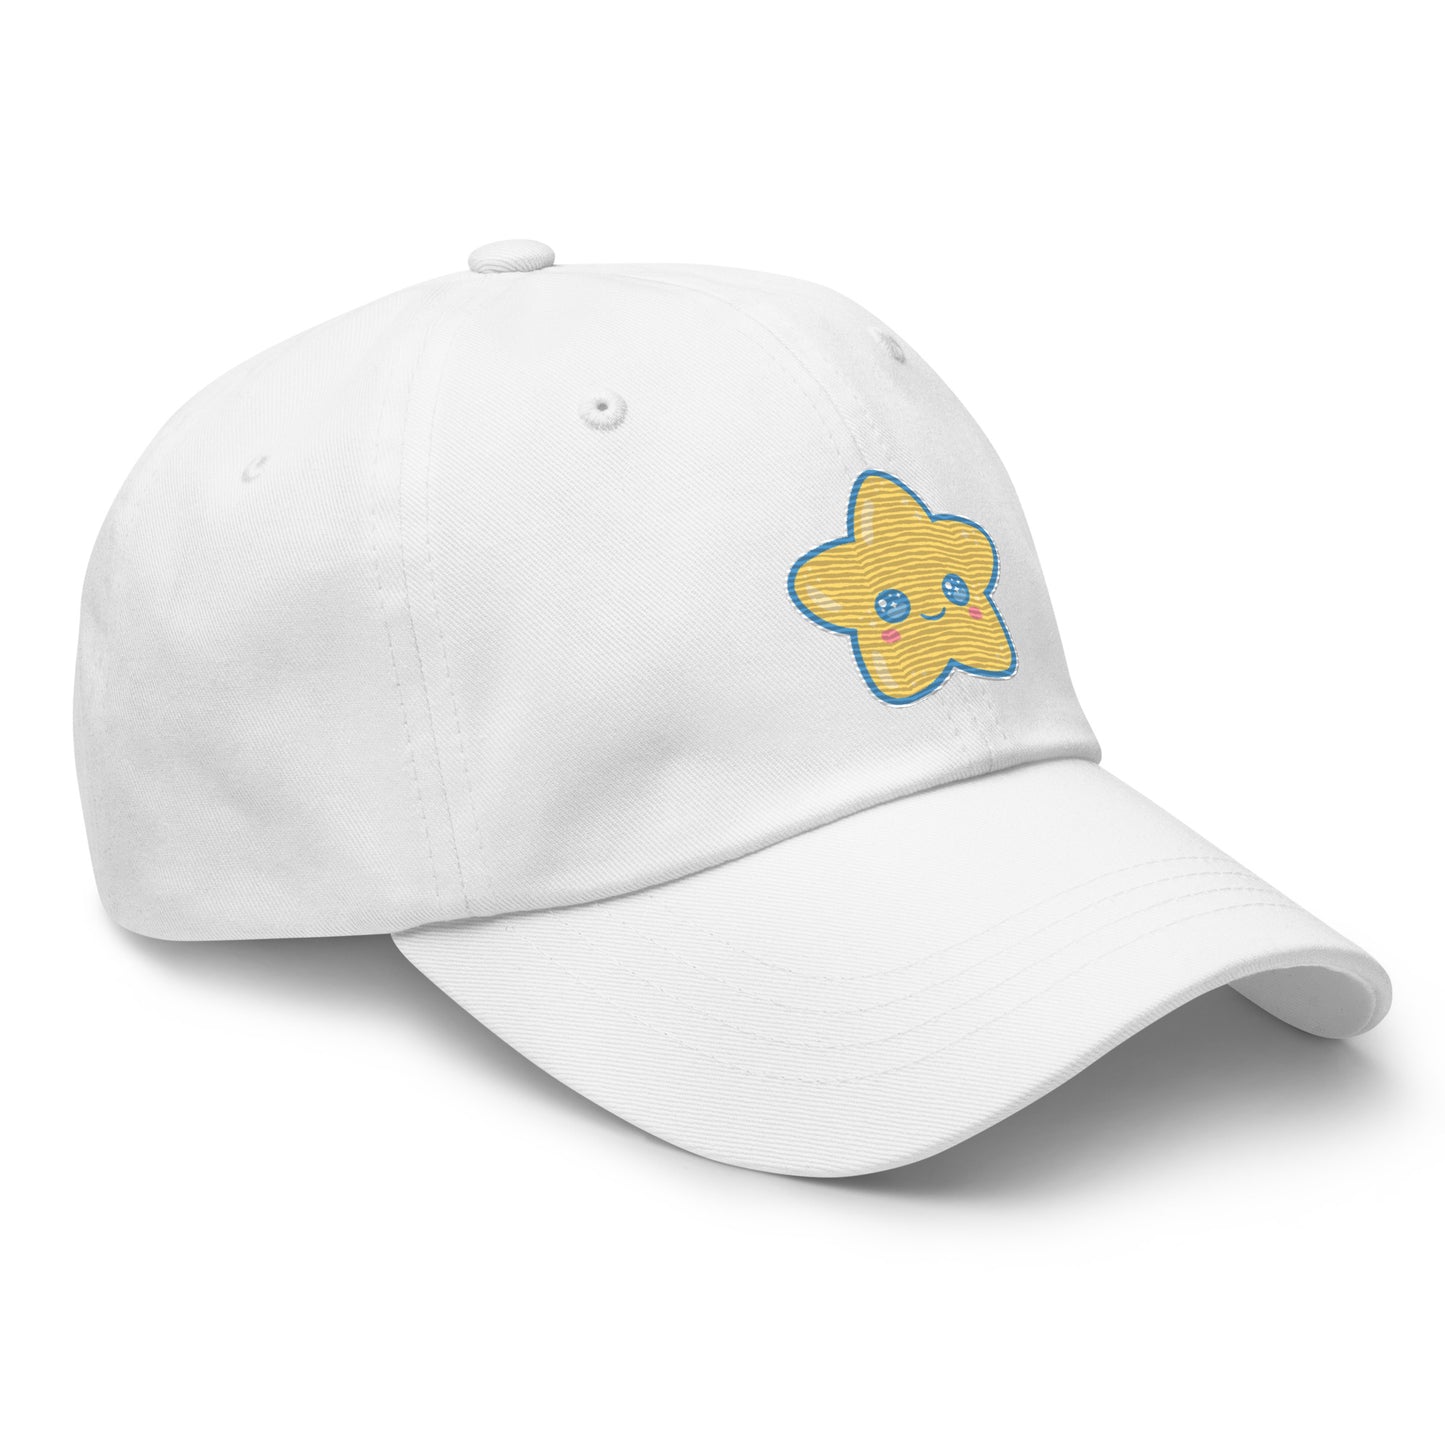 Kawaii Star Embroidered White Hat